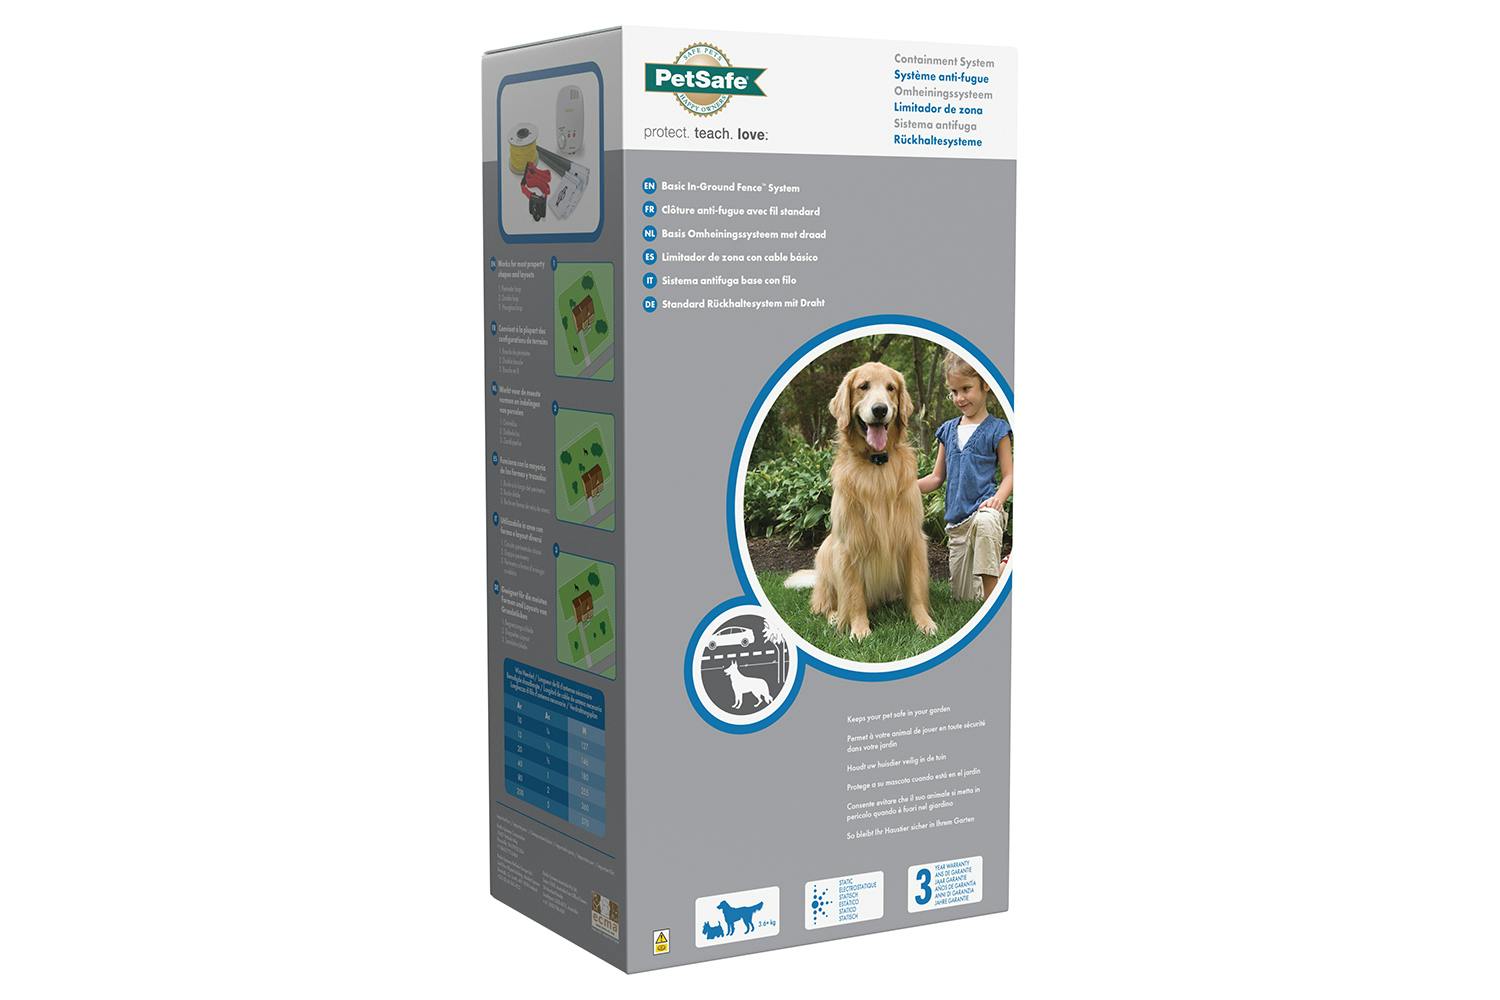 PetSafe Basic In-Ground Pet Fence – from the Parent Company of